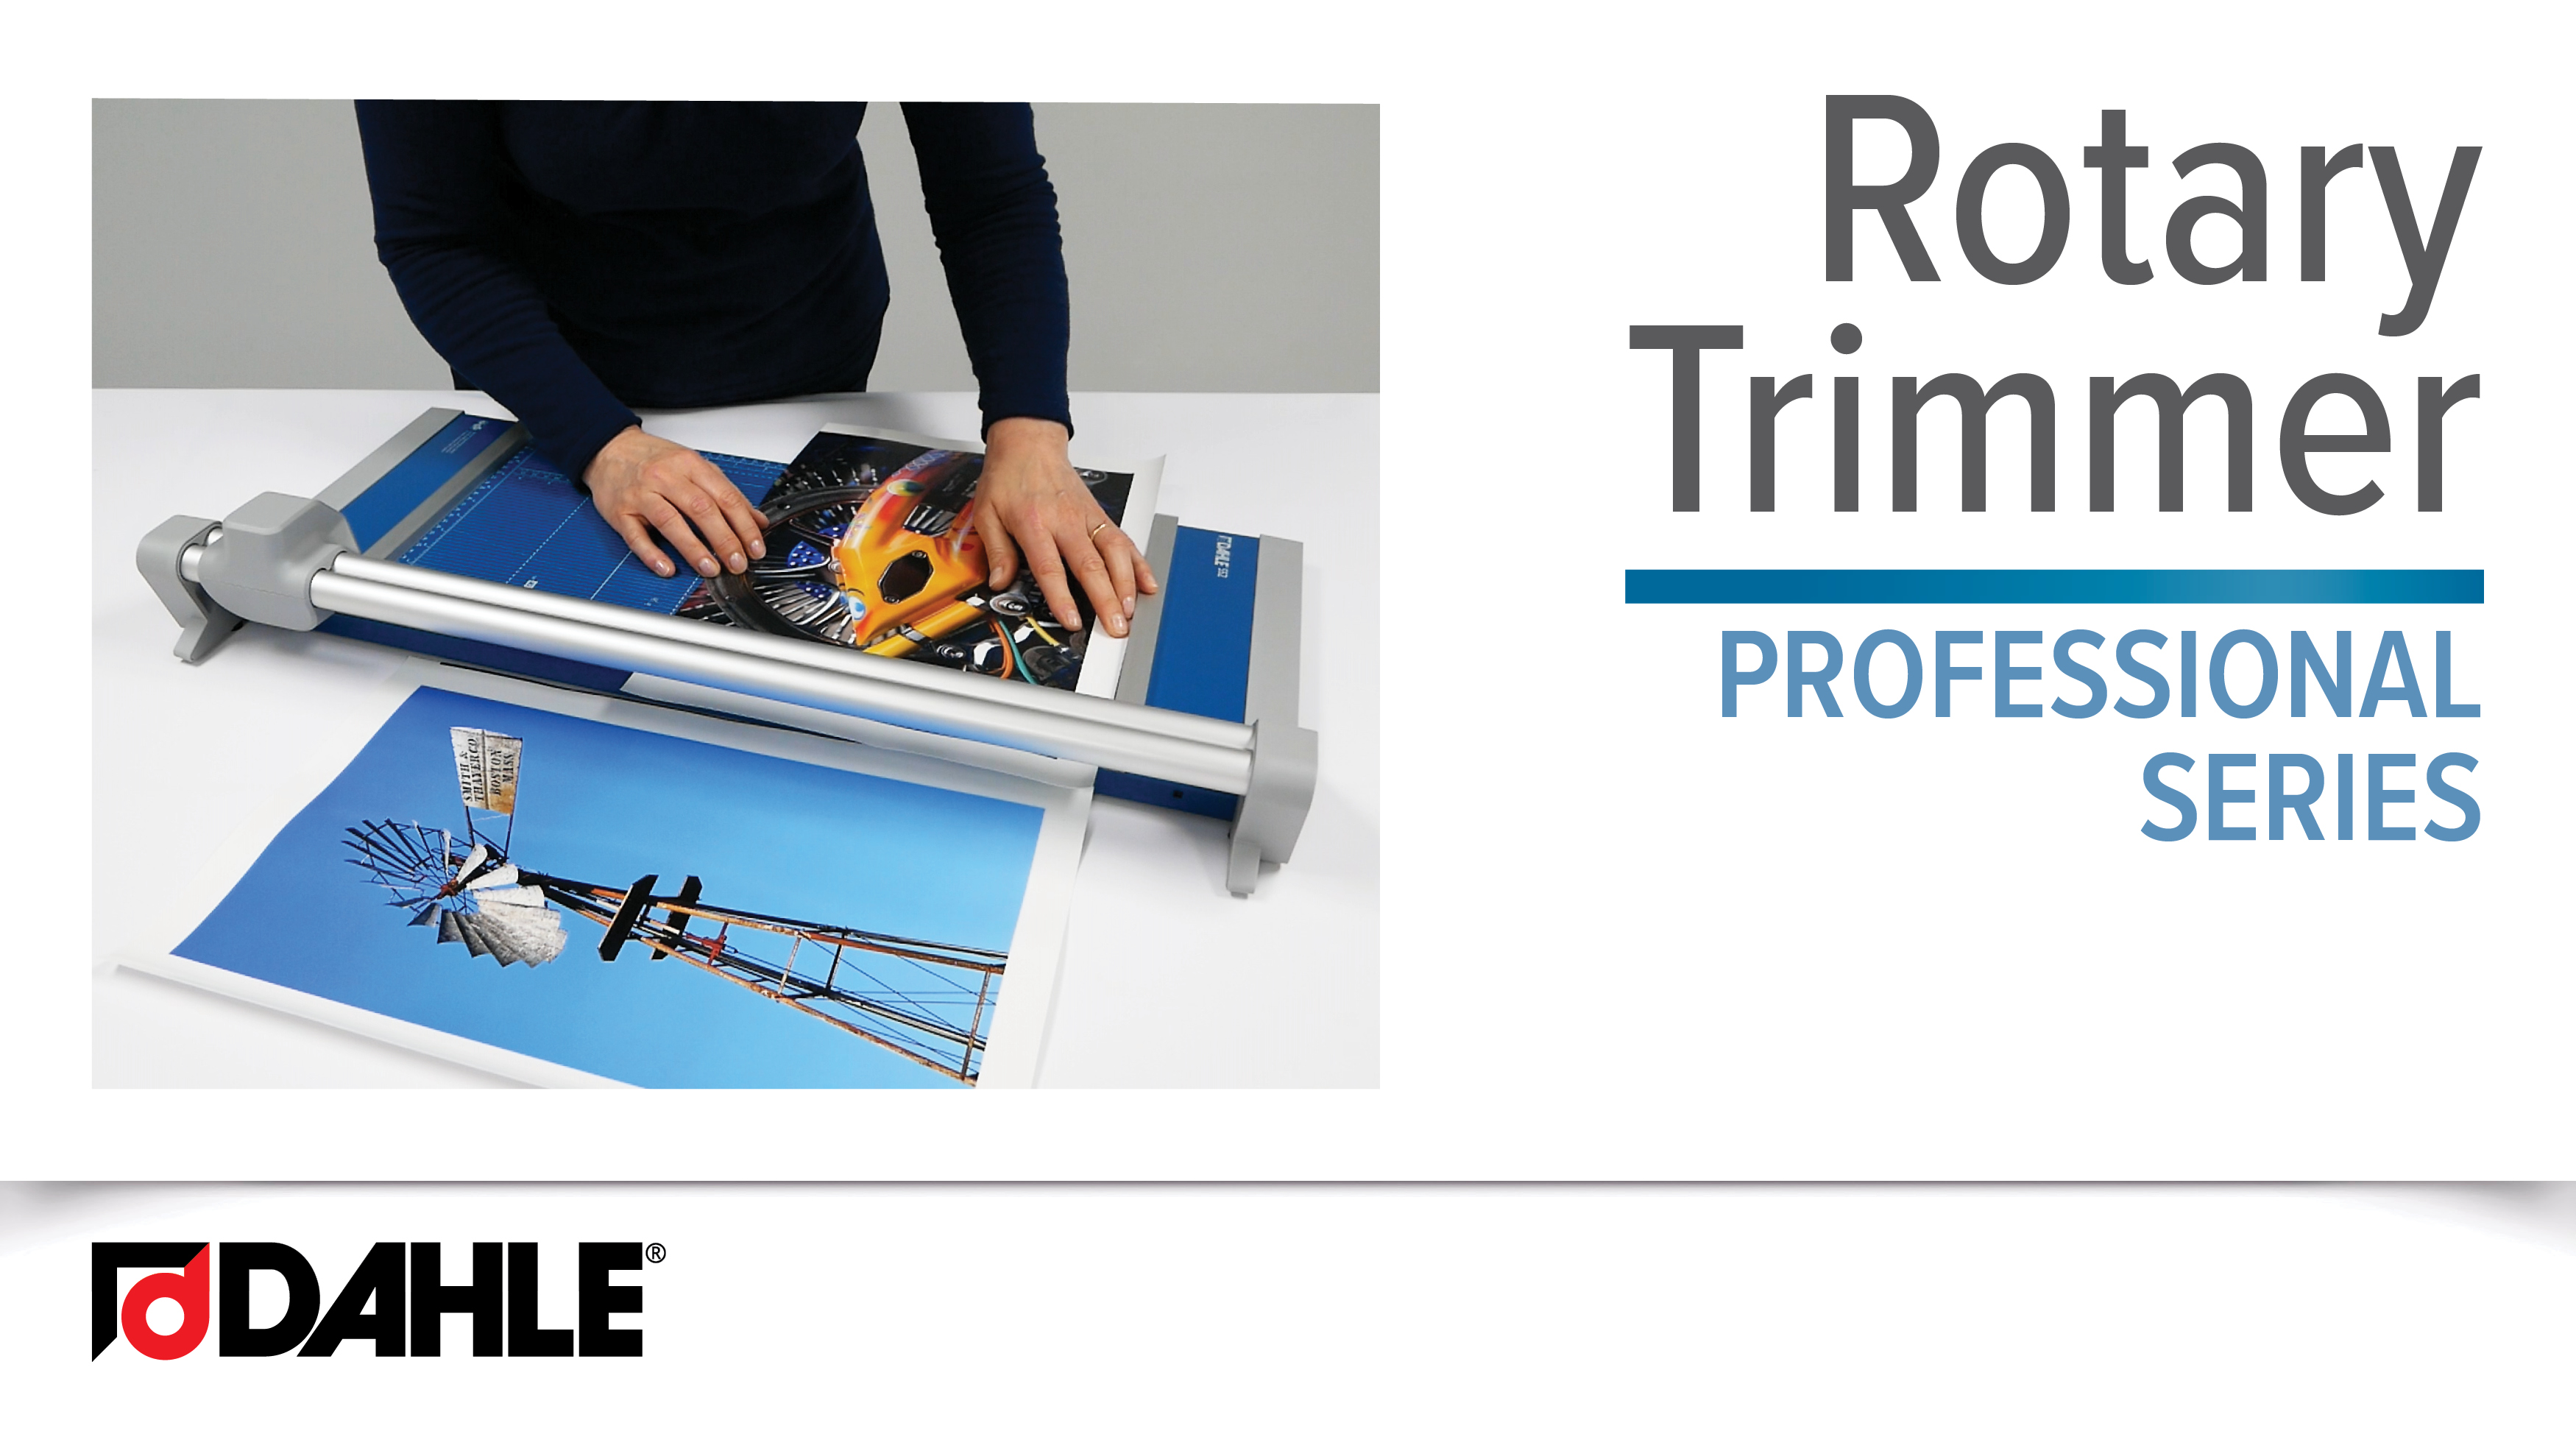 Dahle 552 Professional Rotary Trimmer Video